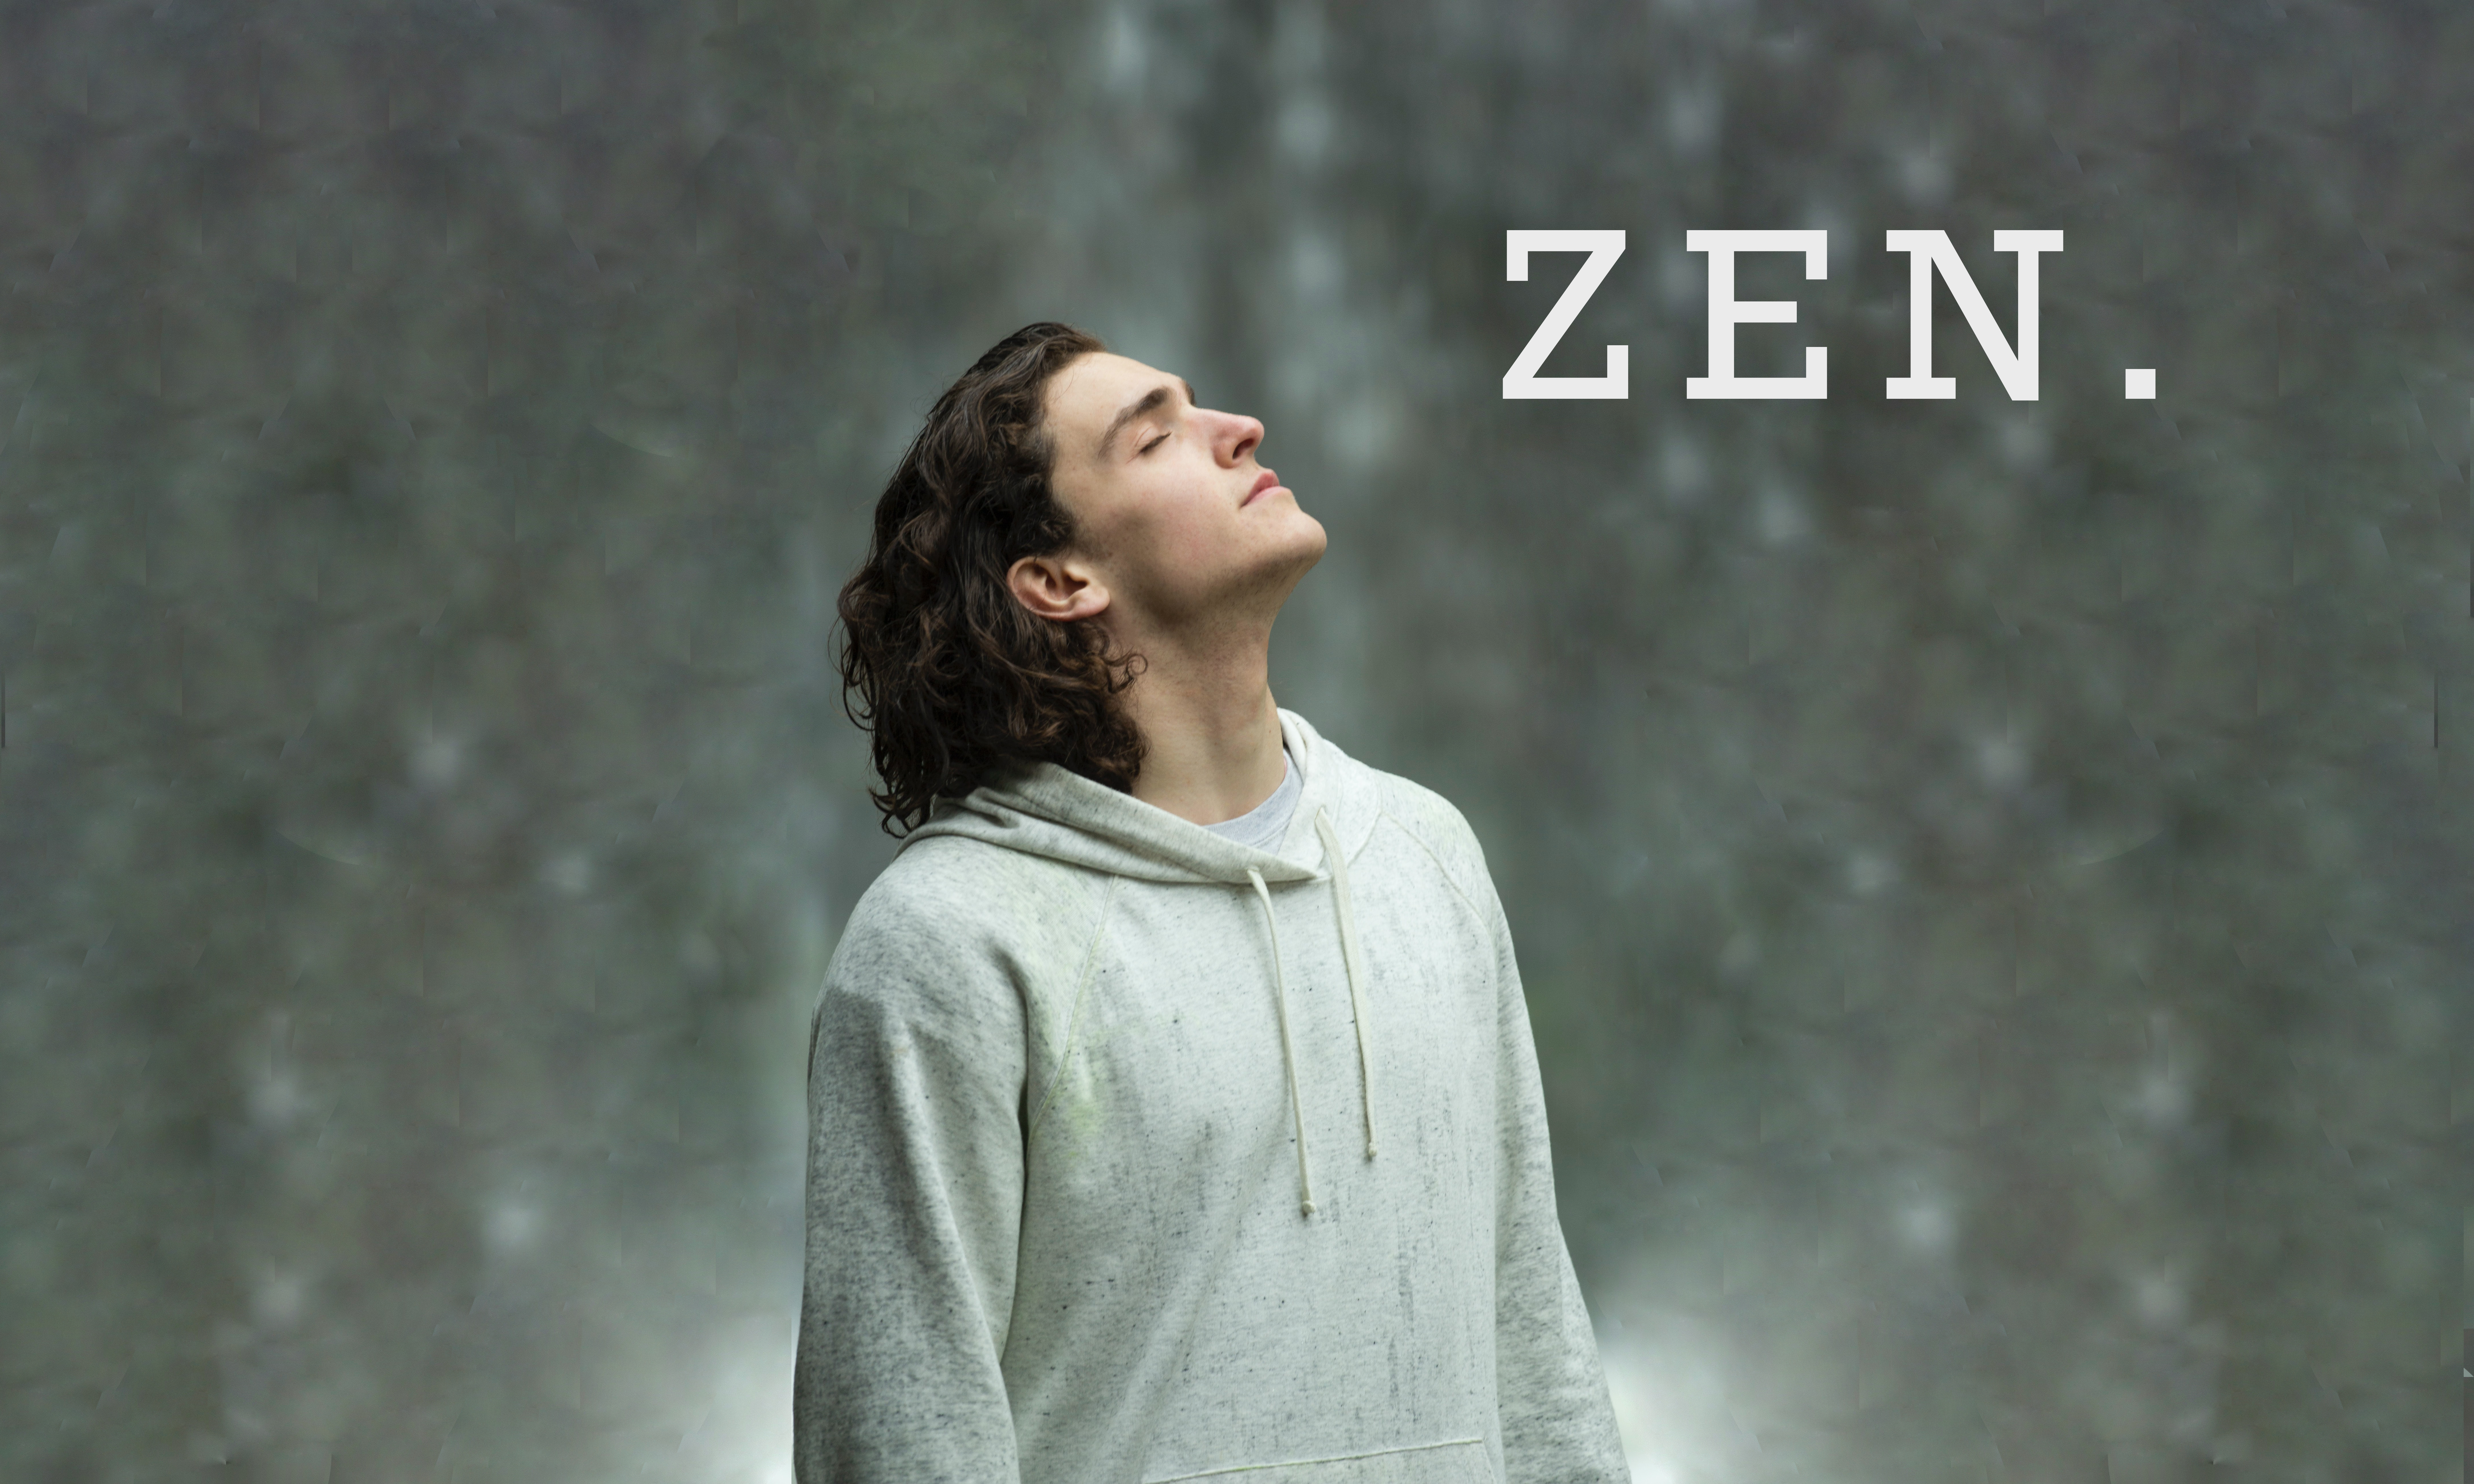 A peaceful, medium build man with slightly long hair the word ‘ZEN.’ in his eyeline